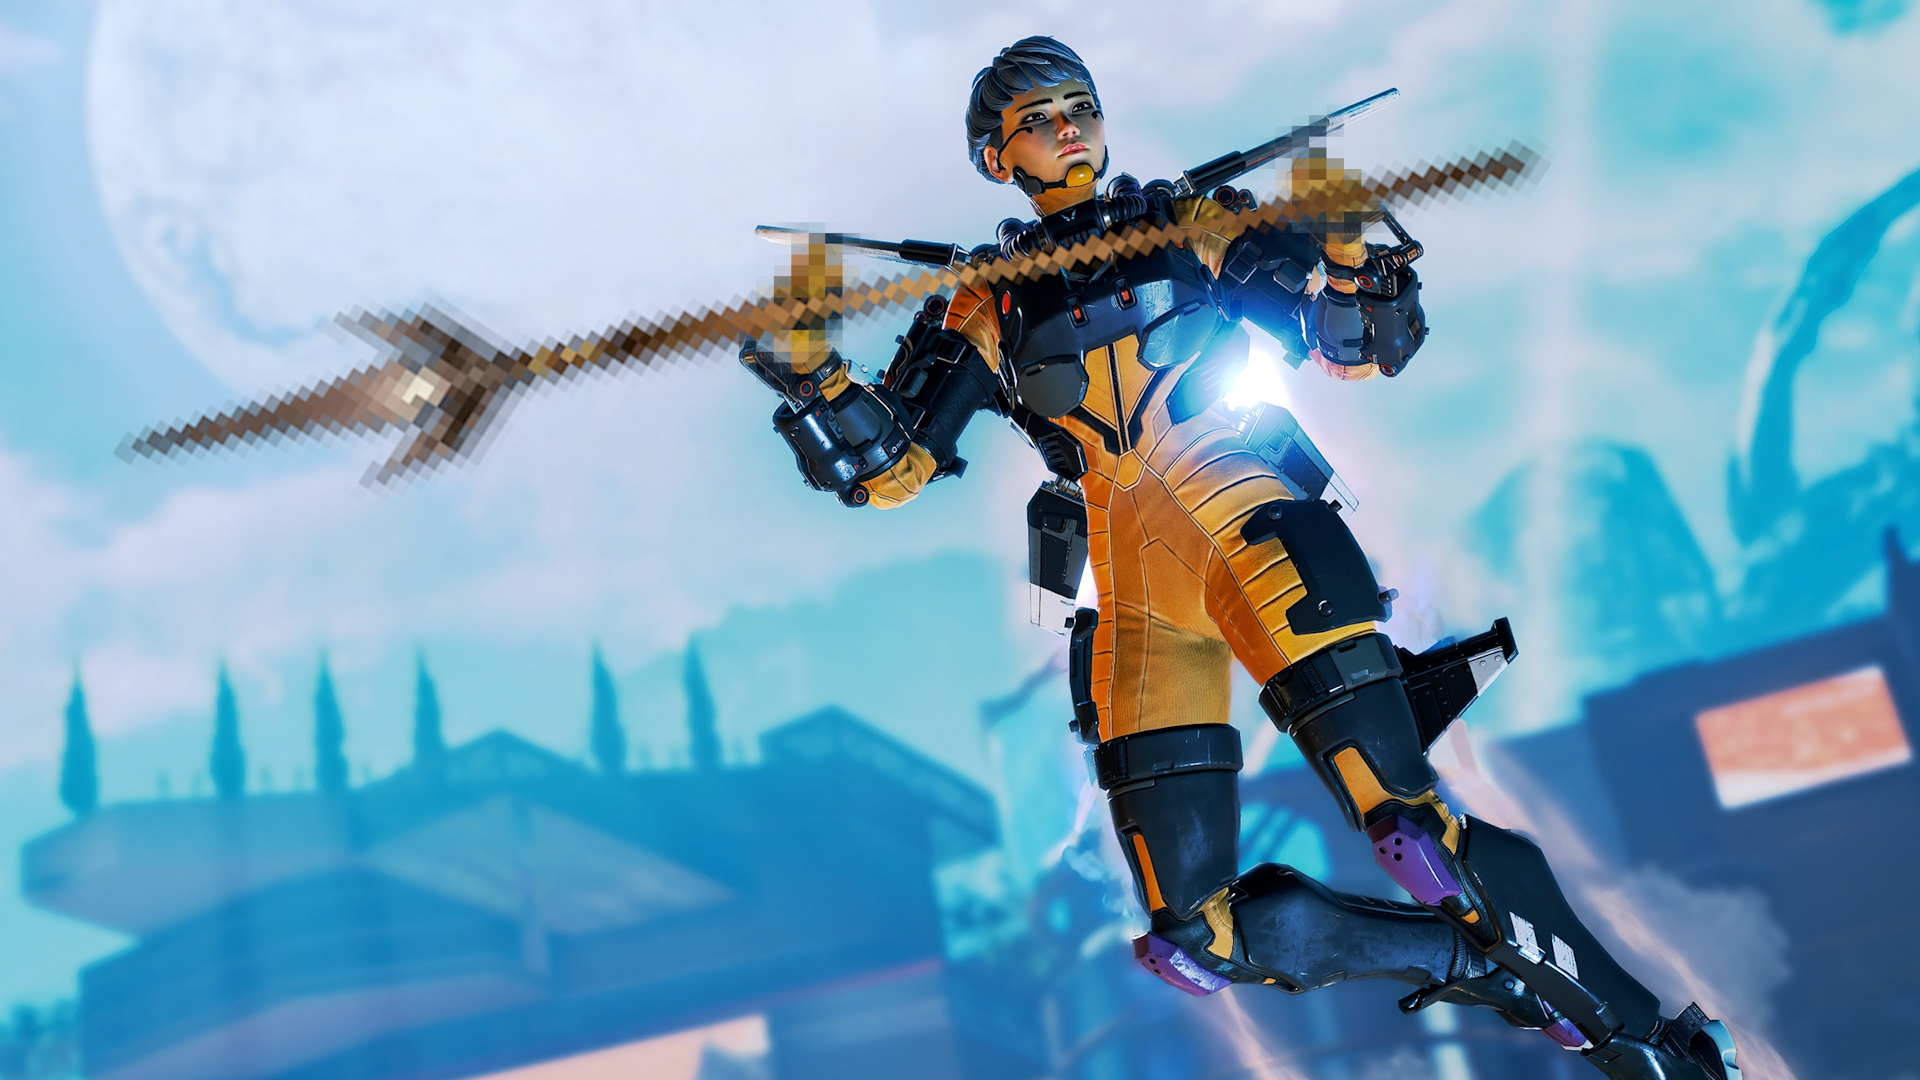 Apex Legends Doppelgangers Collection Event: Release date, skins, and more